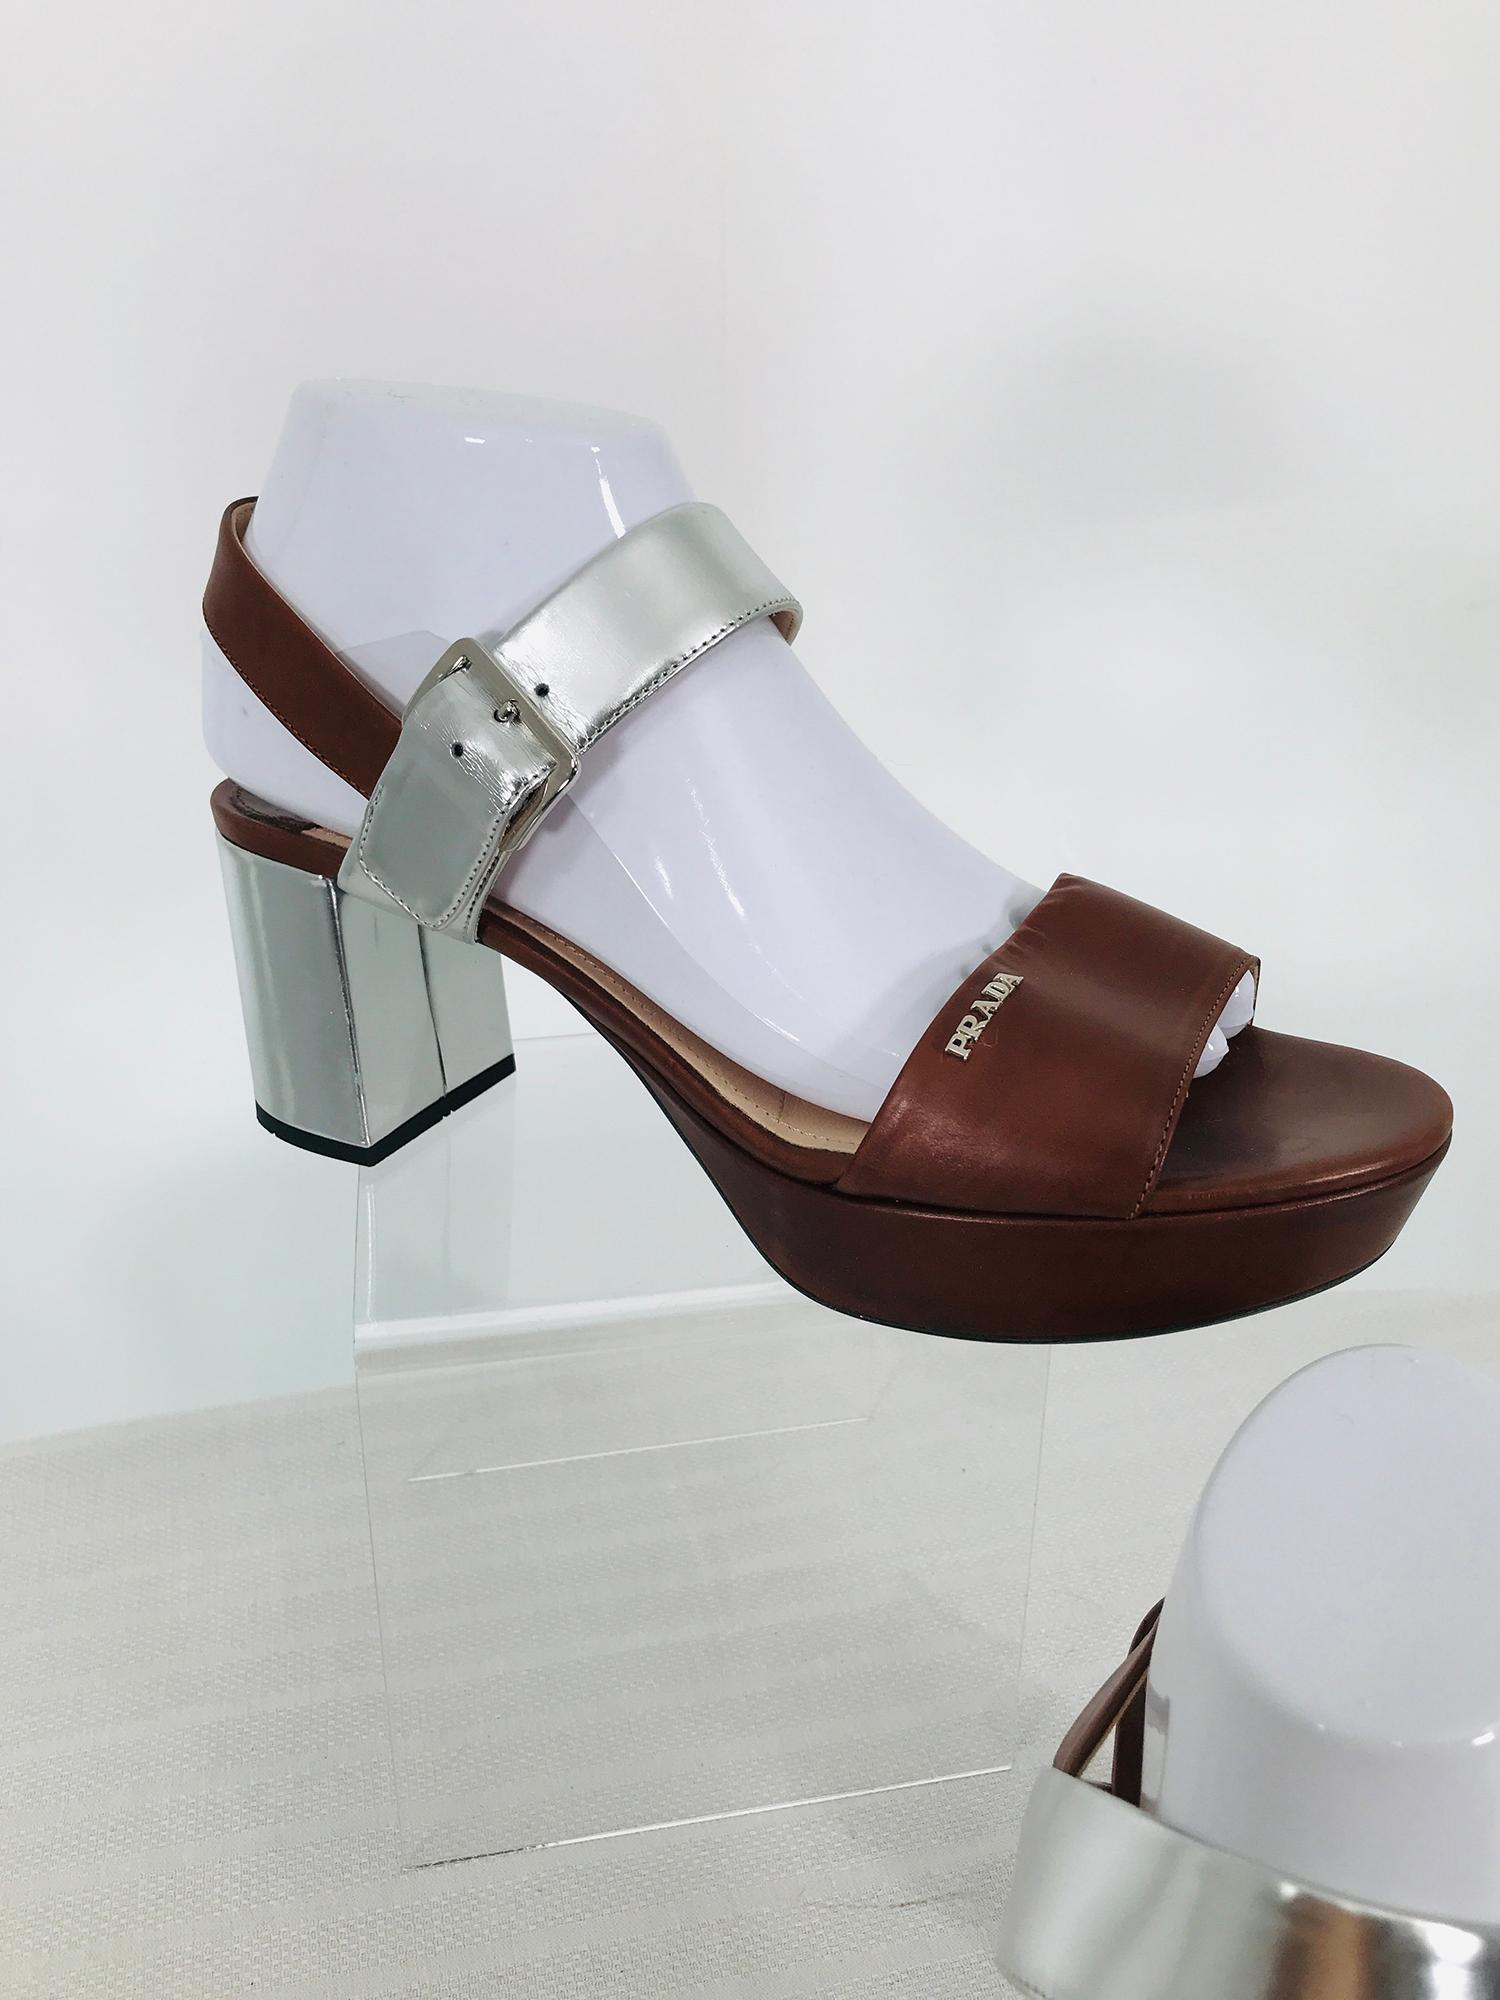 Prada ankle strap open toe platform sandals silver lamé heels & straps. Chocolate brown leather fronts the chunky heels and front ankle strap are silver lamé leather, silver metal buckles close at the ankle. There is a Prada silver metal signature